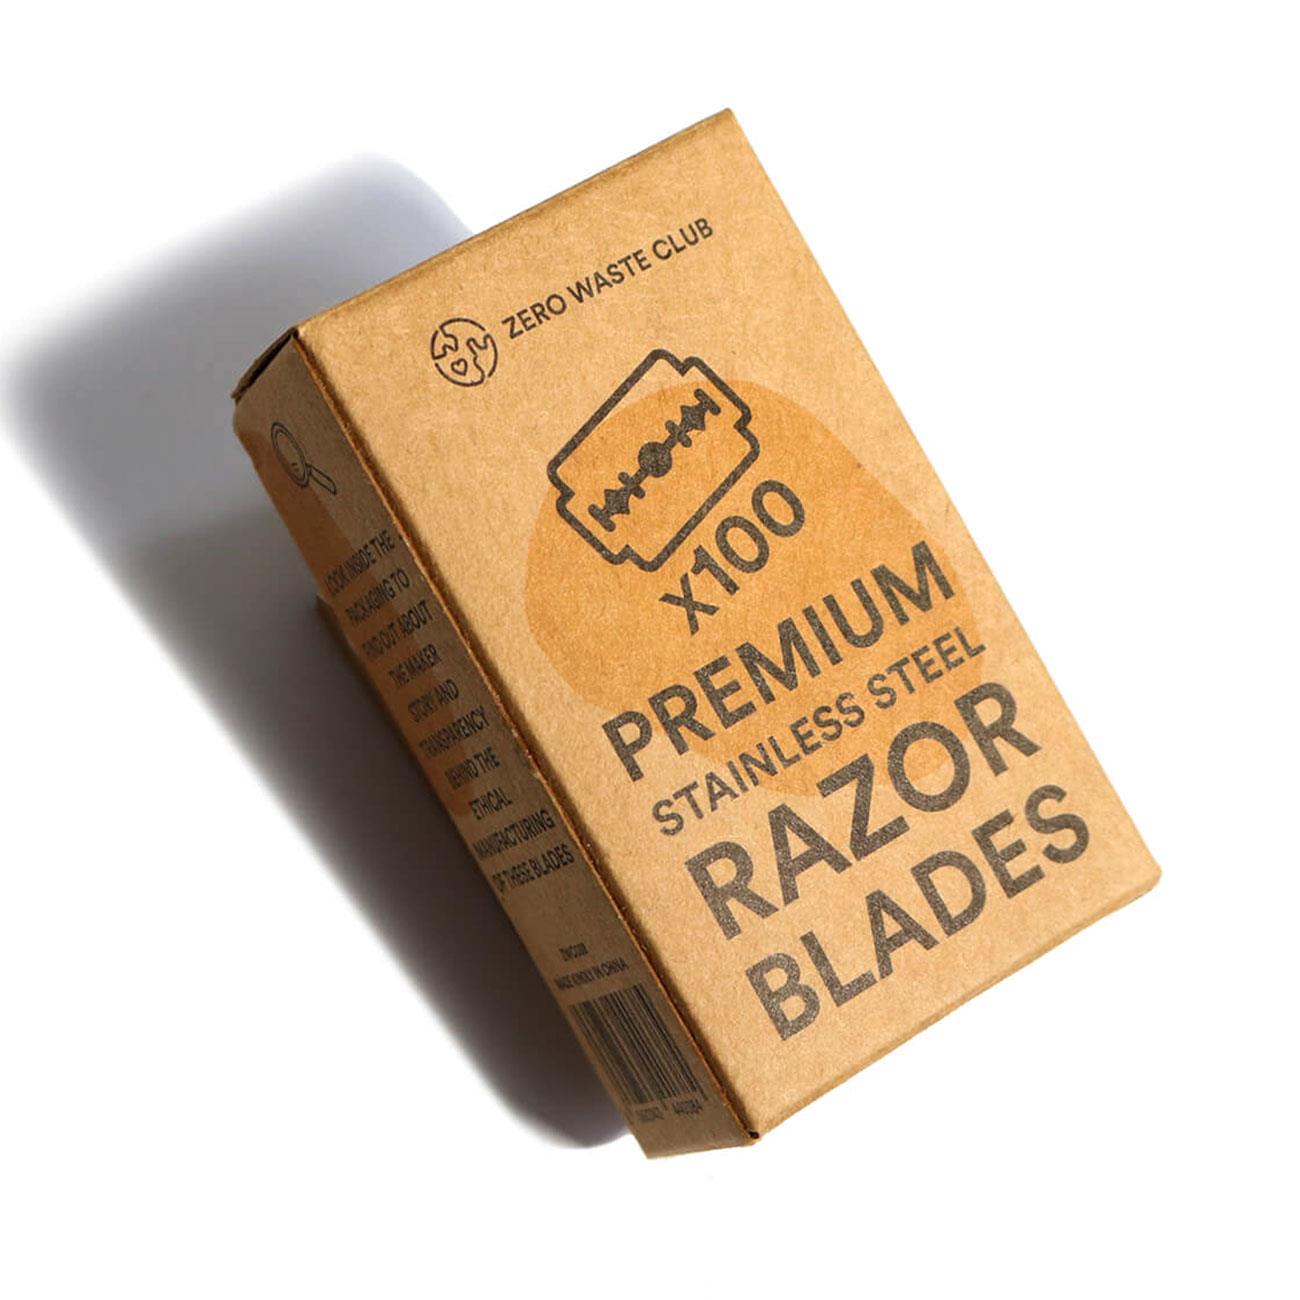 Double Edge Safety Razor Blades- Pack of 10